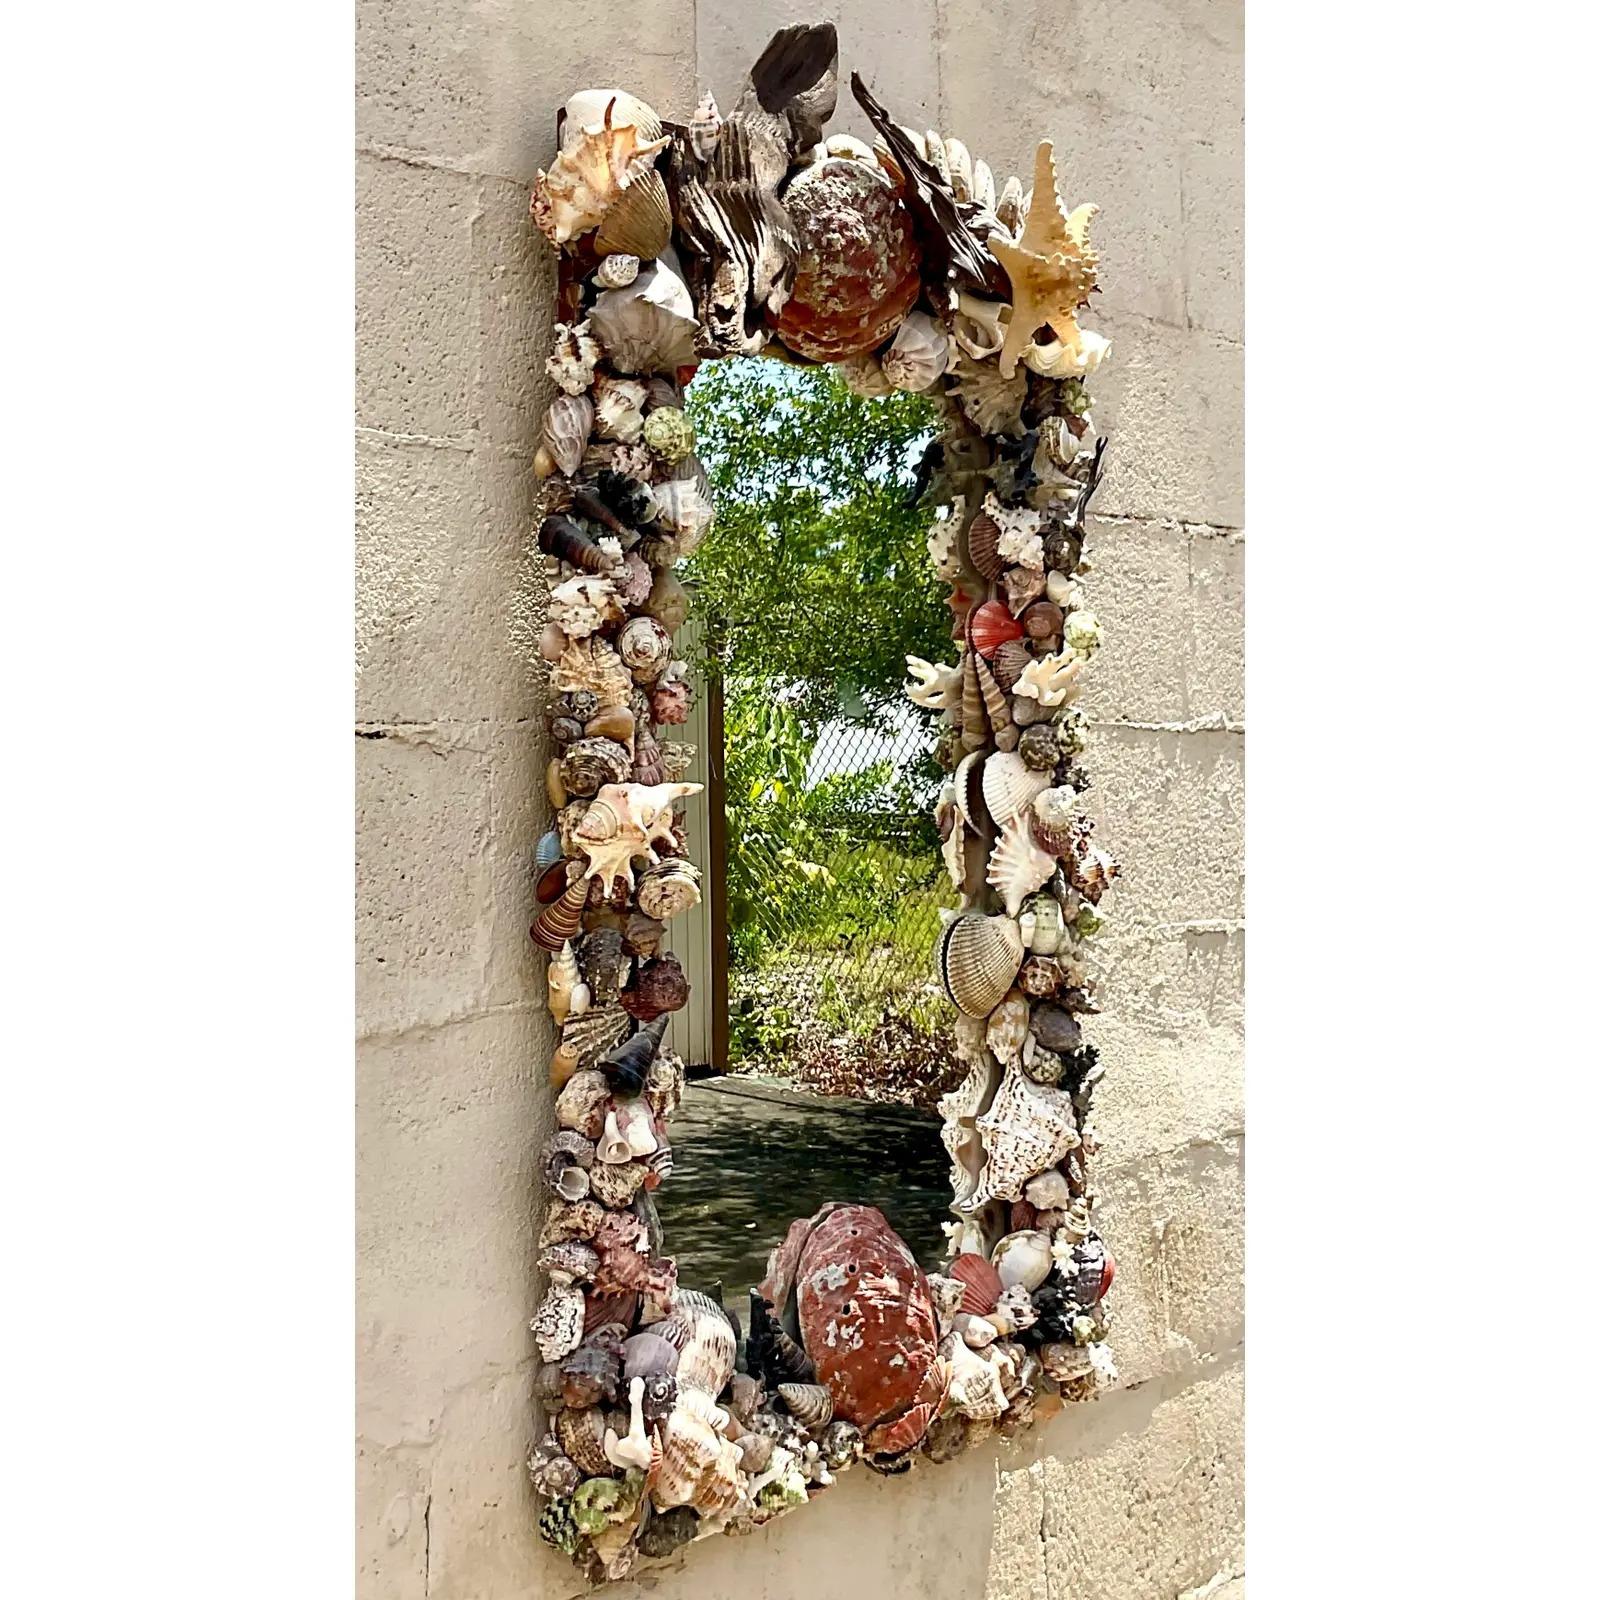 Incredible vintage Coastal wall mirror. A chic hand made collection of specimen shells. This is a real work of art. Acquired from a Palm Beach estate.